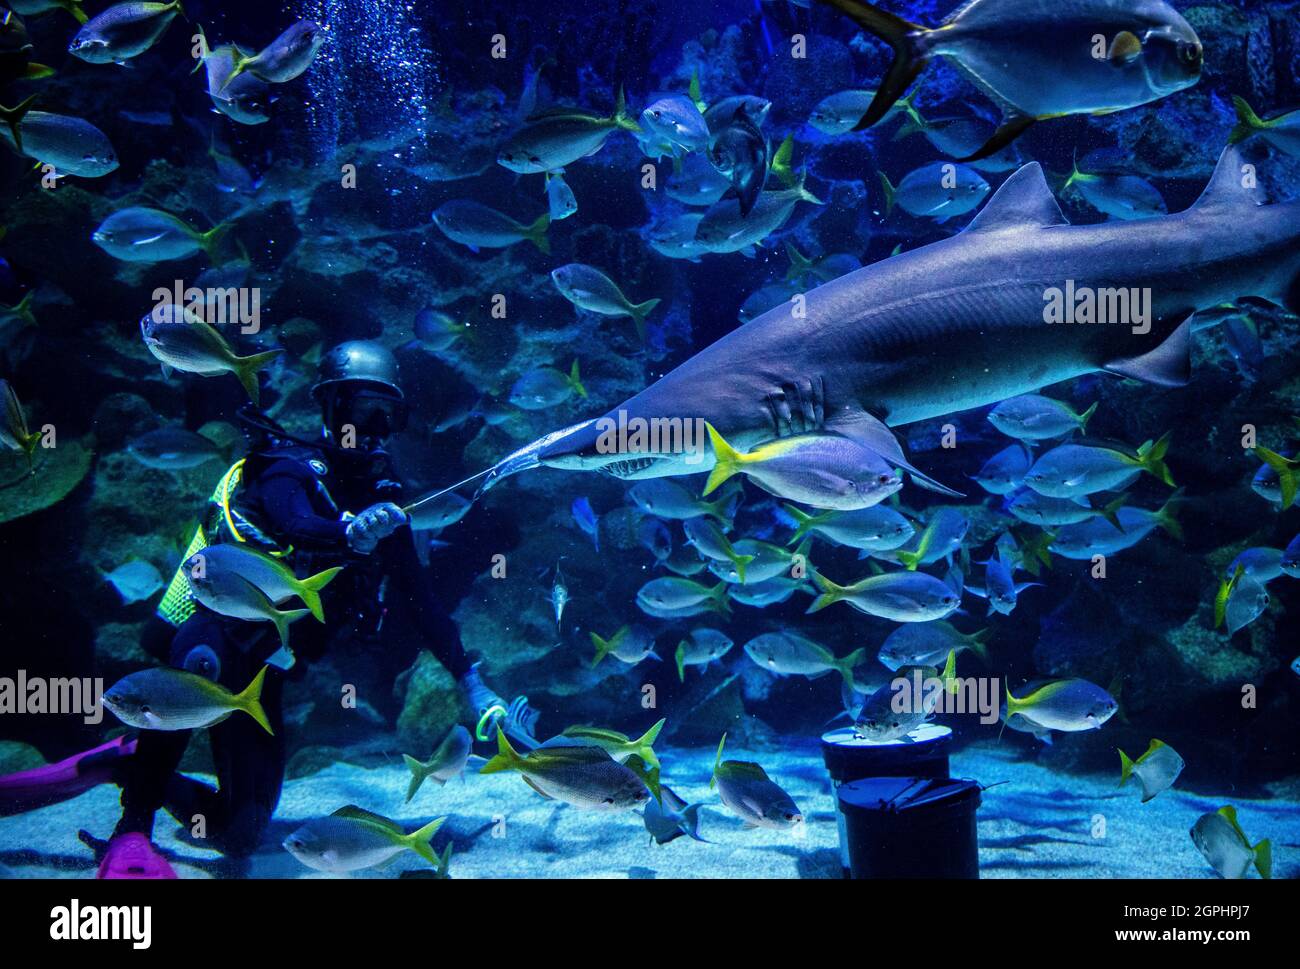 Kuala Lumpur, Malaysia. 29th Sep, 2021. A scuba diver seen feeding the fish at the KLCC Aquaria prior to re-opening to the public in Kuala Lumpur, Malaysia.Recreational parks will be allowed to open to public for activities under the Malaysia's National Recovery Plan amid the coronavirus pandemic restrictions. Credit: SOPA Images Limited/Alamy Live News Stock Photo